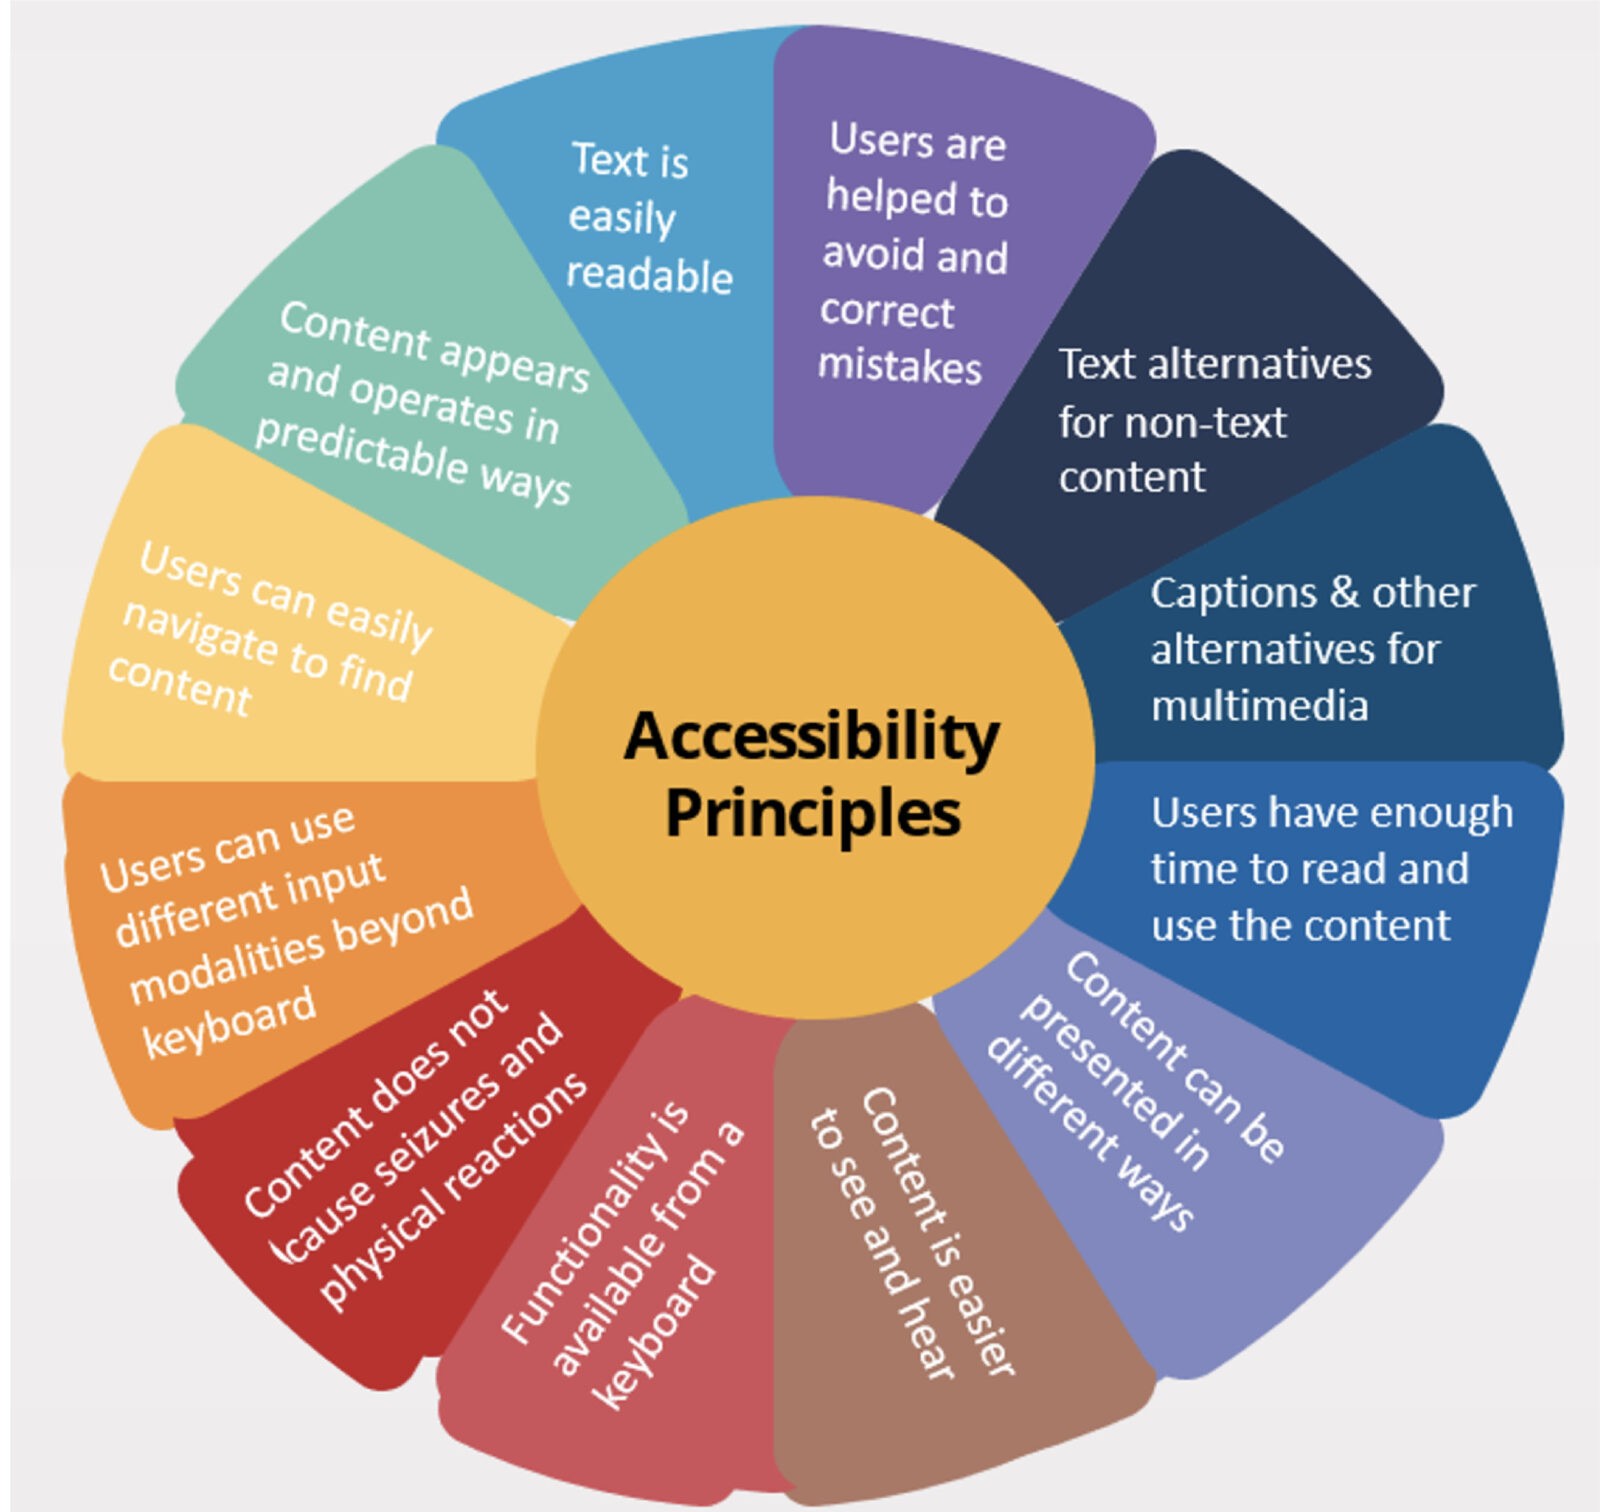 Below are some aspects of accessibility that need to be considered when checking how compliant the educational platform is